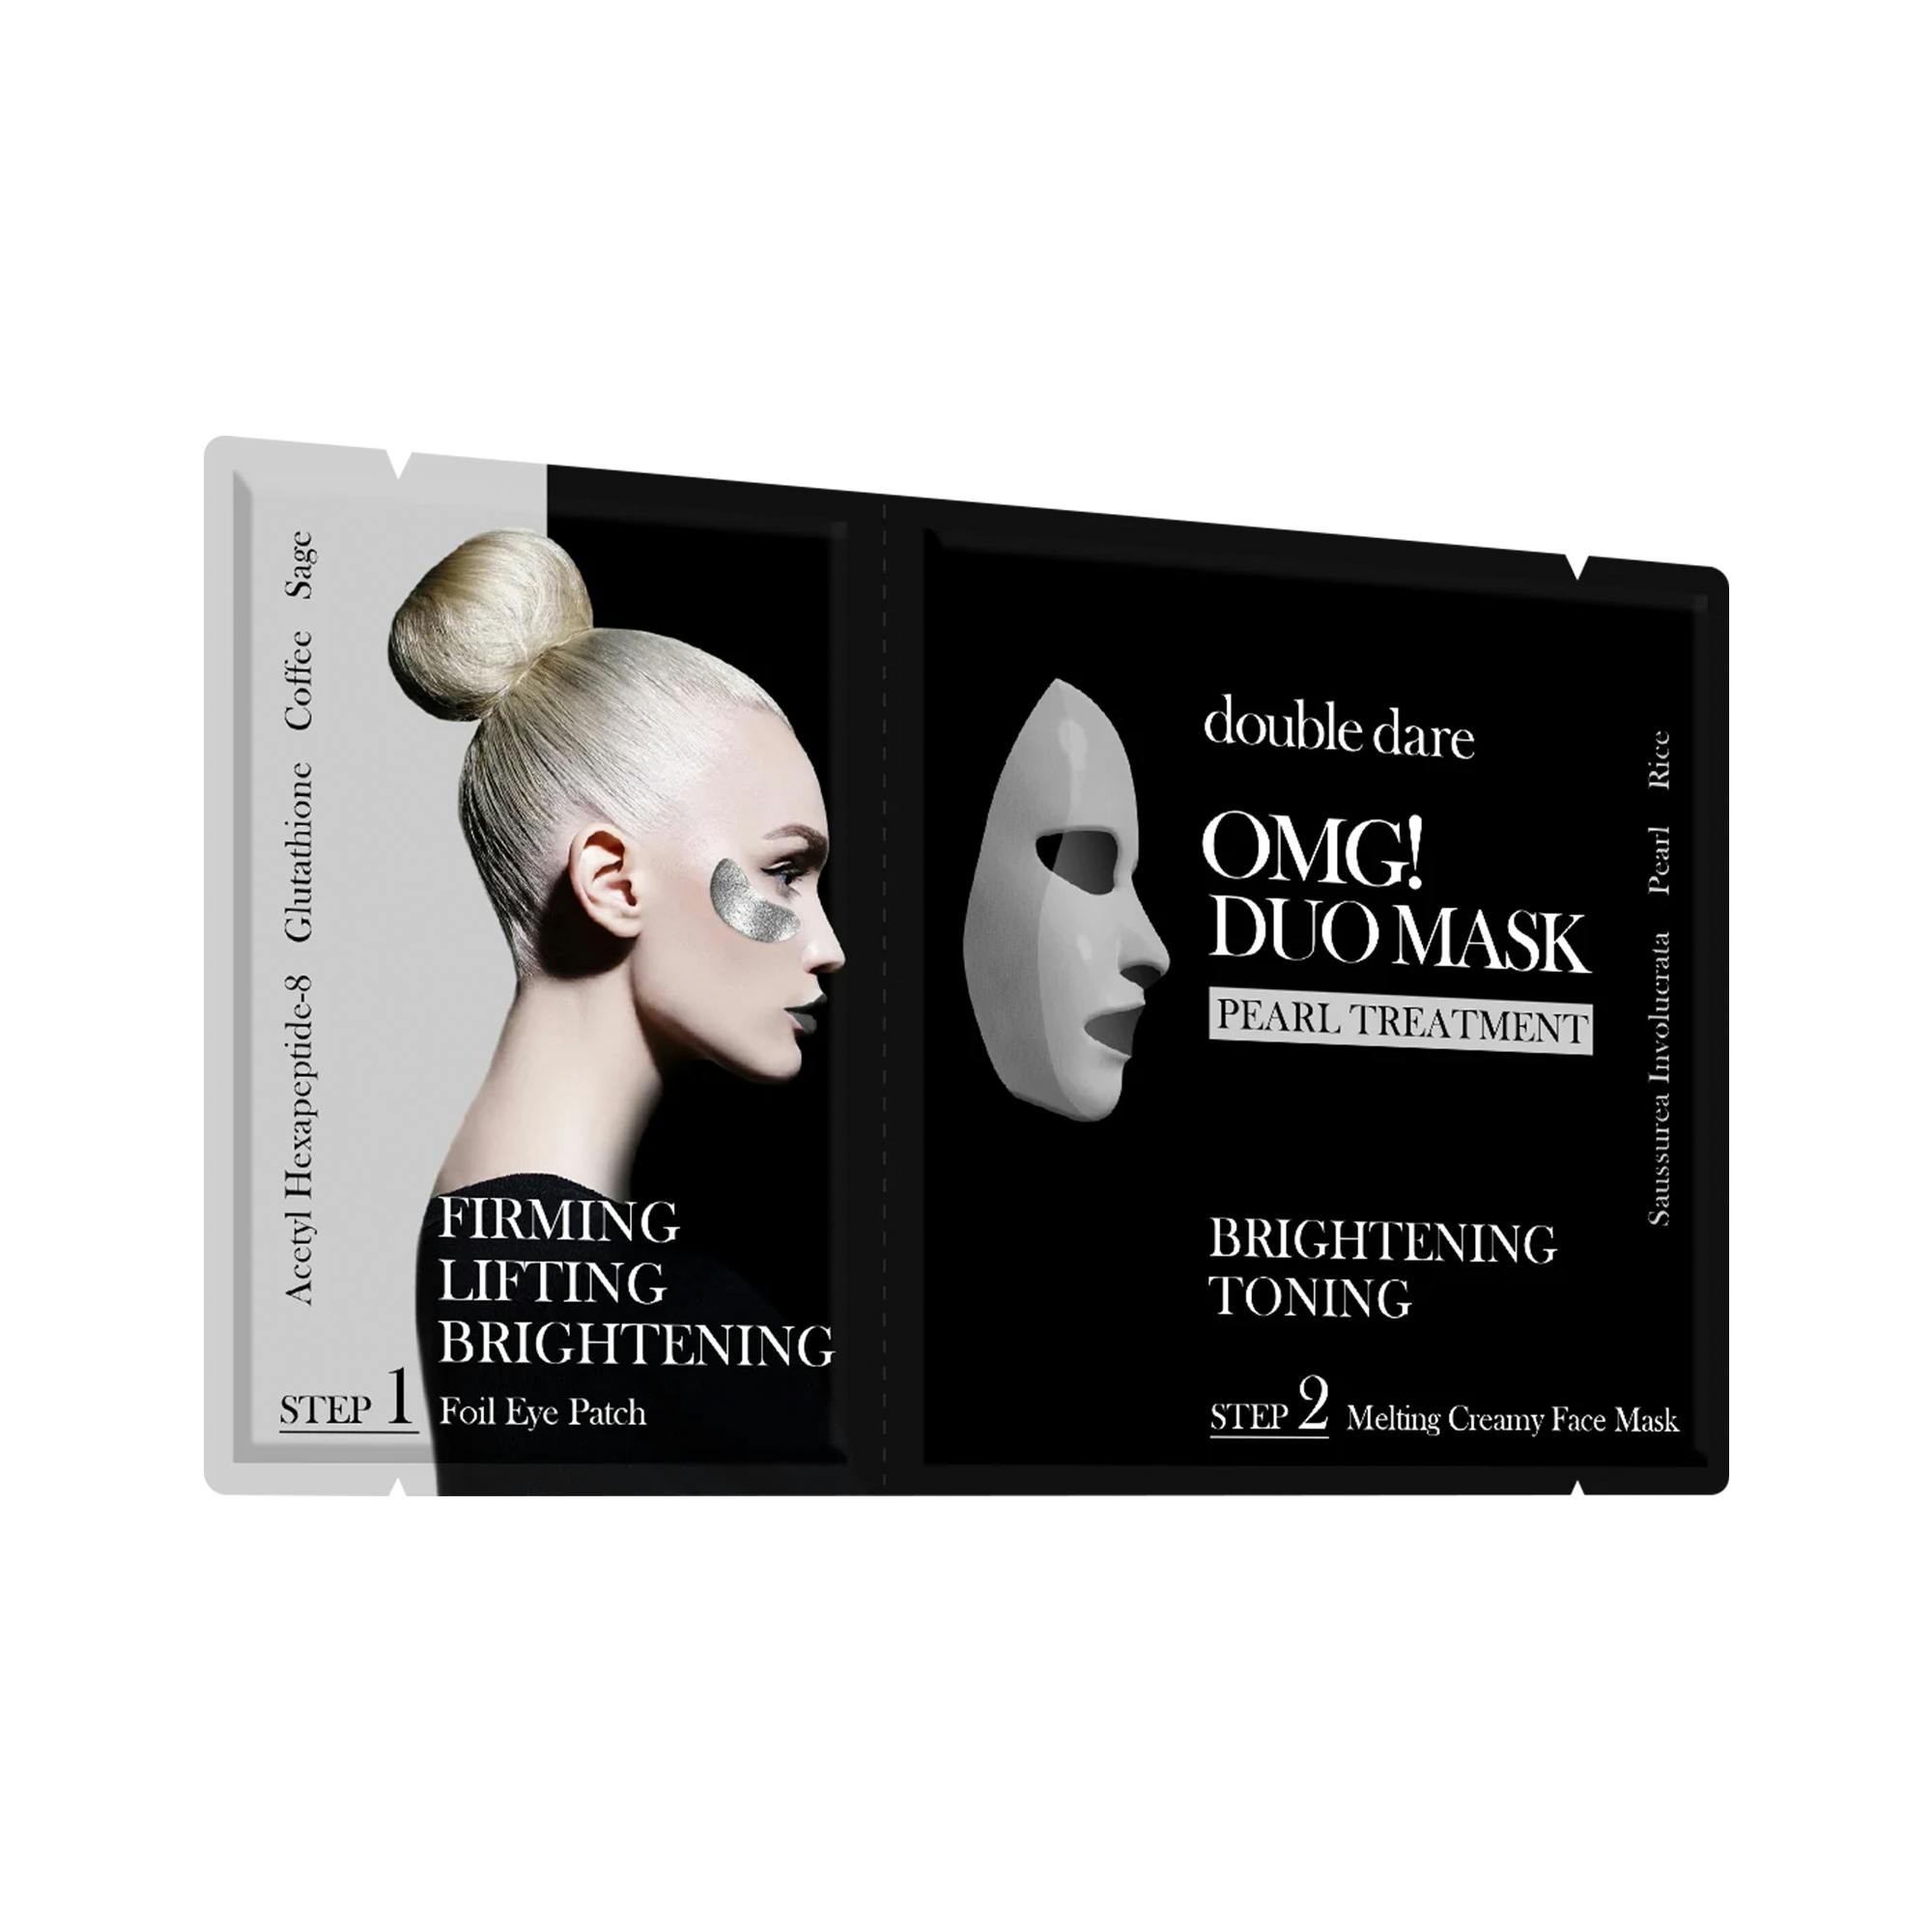 OMG! Double Dare OMG! Duo Mask Pearl Therapy 1 st